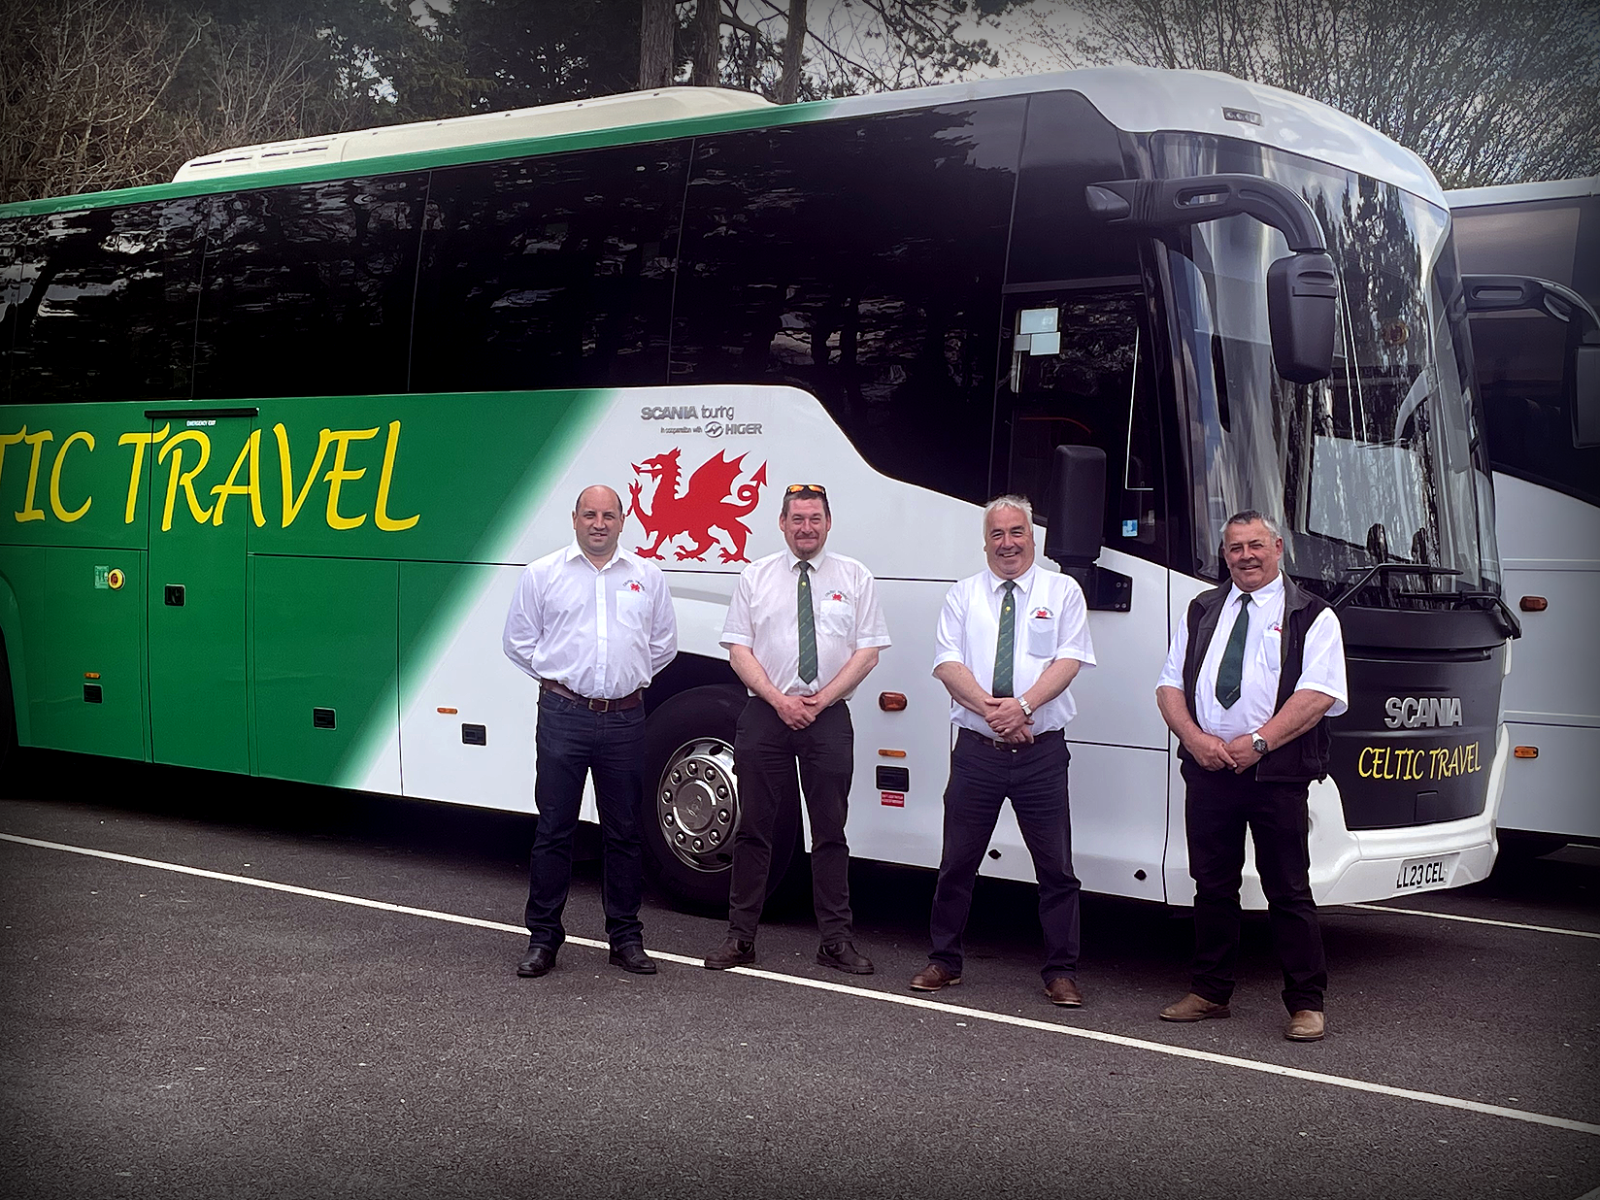 The Team at Celtic Travel